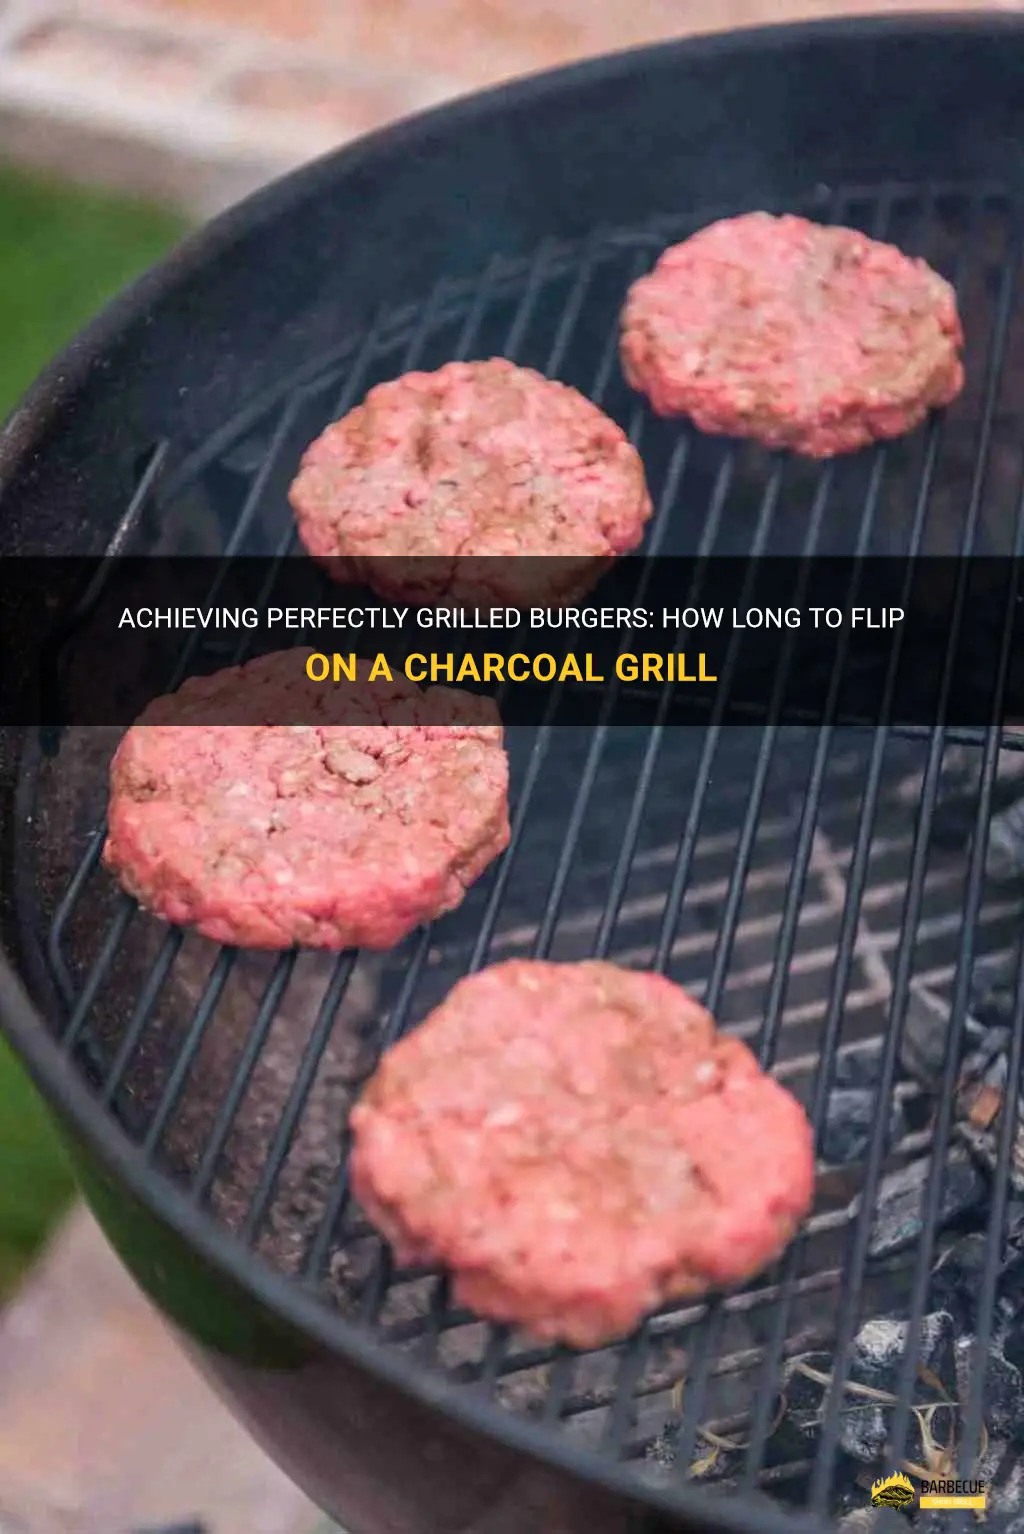 how long to flip burgers on charcoal grill